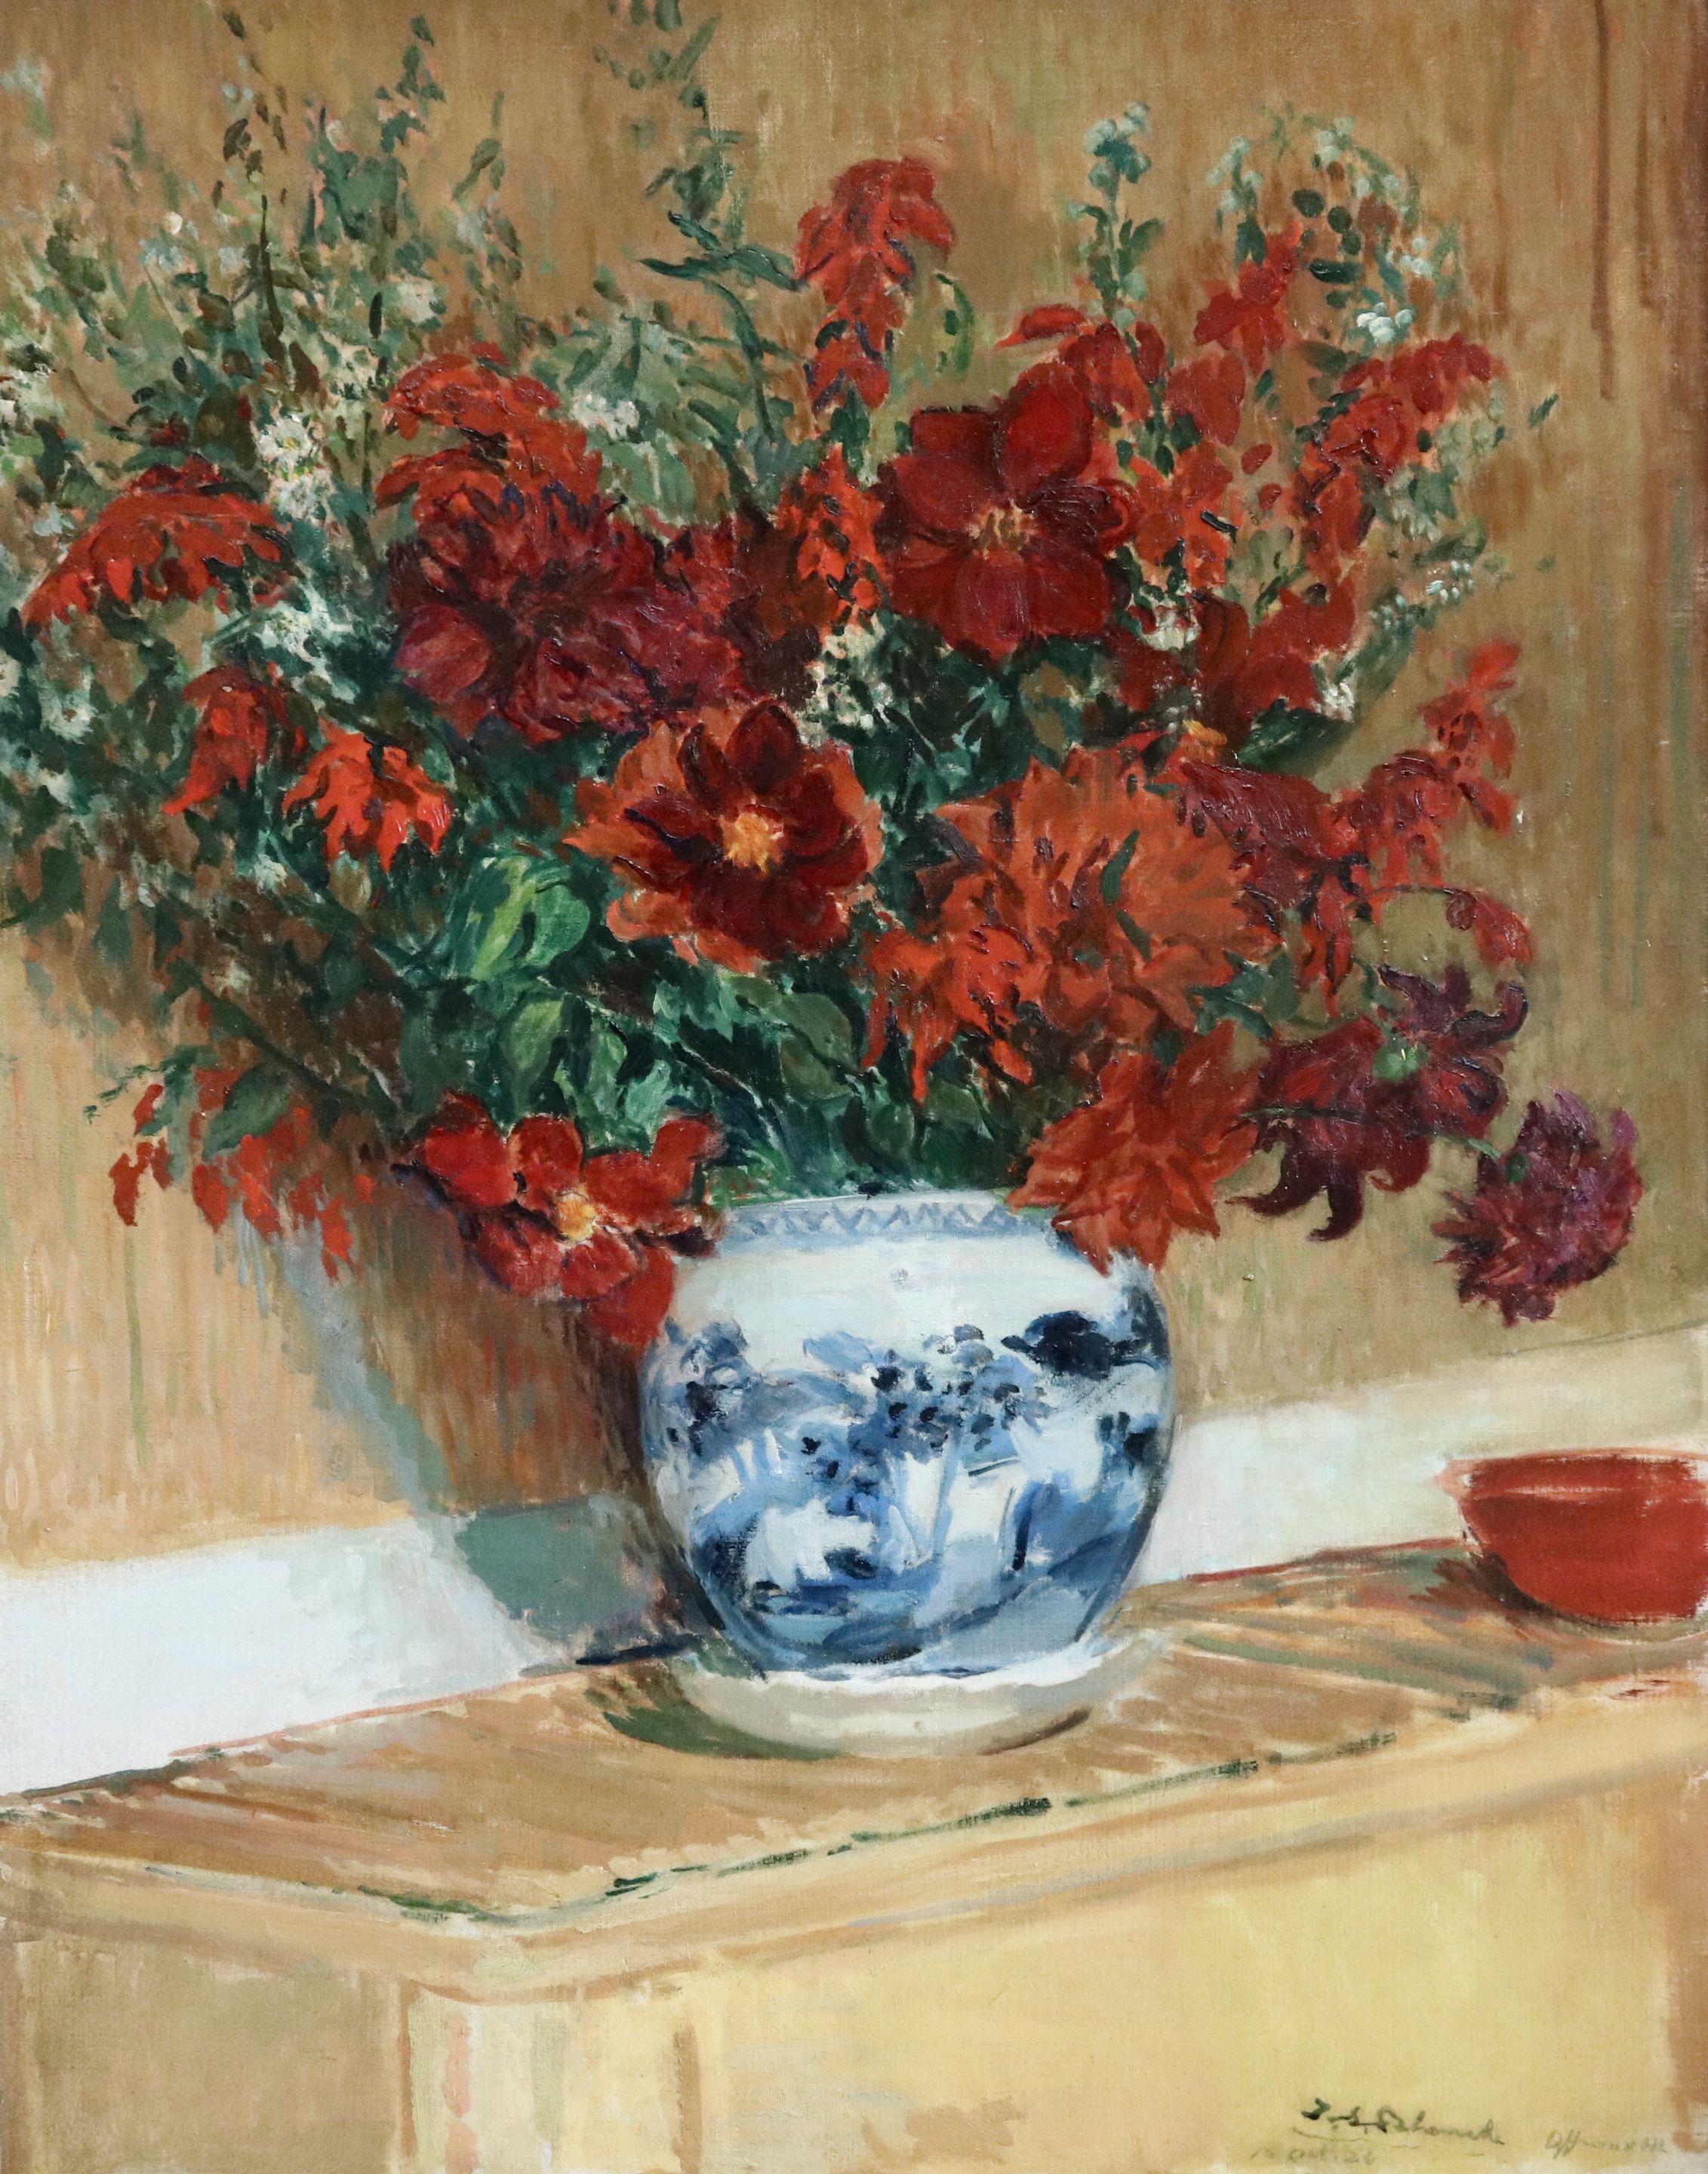 Jacques Emile Blanche Interior Painting - Flowers - 19th Century Oil, Still Life Vase Red Flowers by Jacques-Emile Blanche